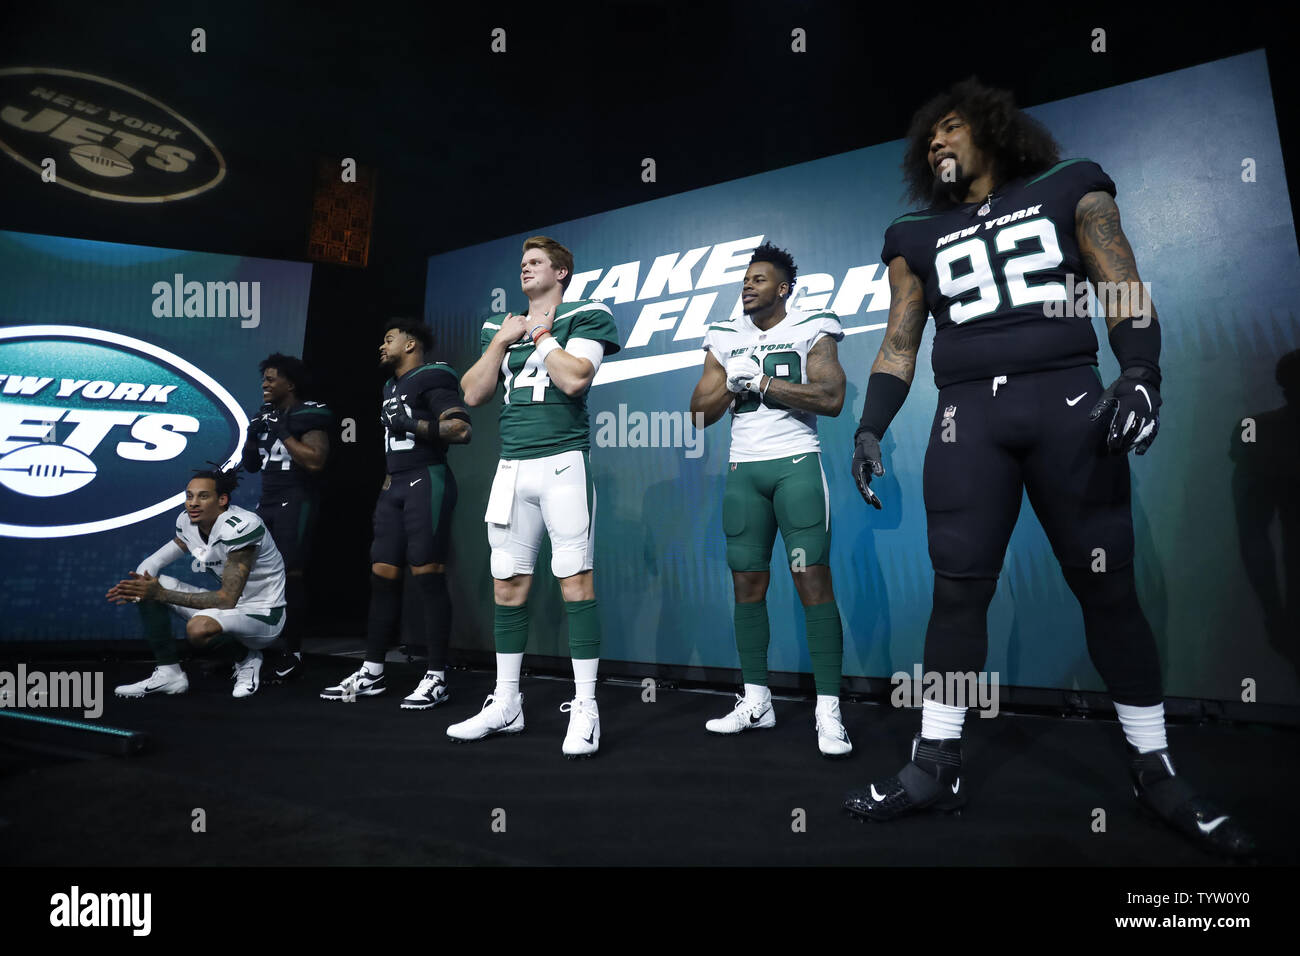 New York Jets quarterback Sam Darnold (14) models the new Jets NFL football uniforms with teammates when the New York Jets host a Uniform Launch Event at Gotham Hall in New York City on April 4, 2019. This is the first New York Jets overhaul of its uniforms since 1998.         Photo by John Angelillo/UPI Stock Photo